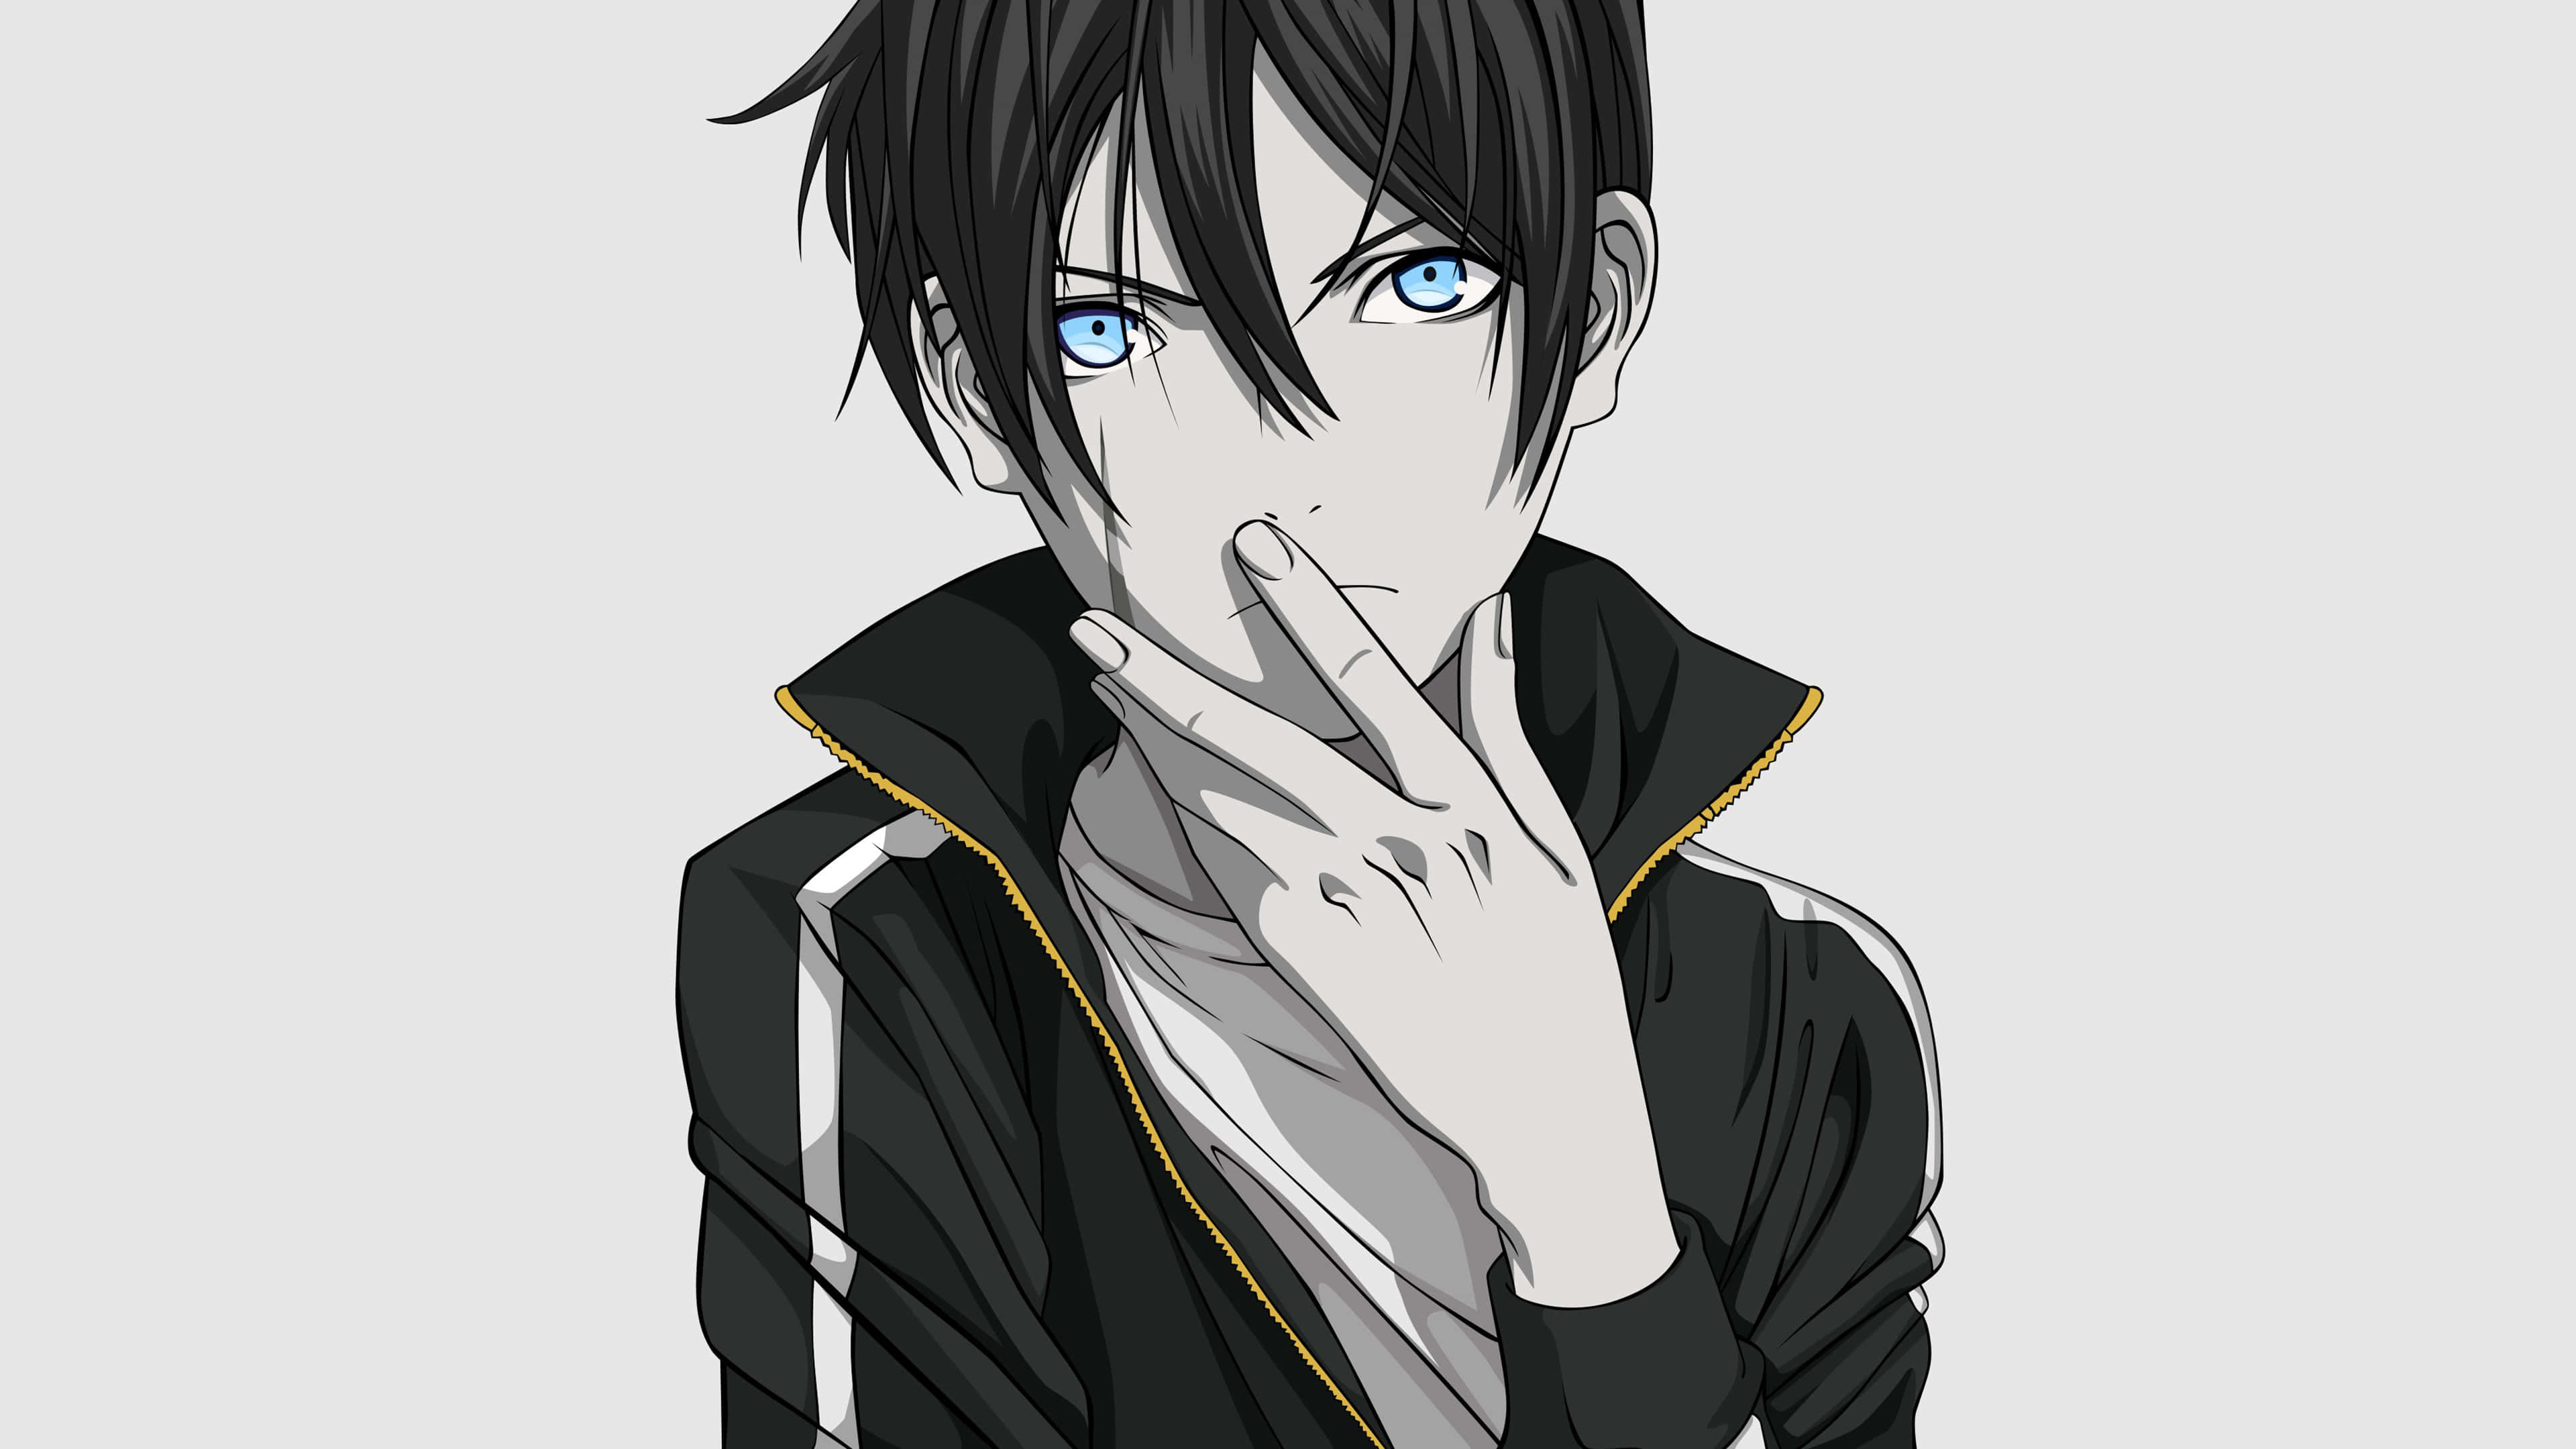 4. Yato from Noragami - wide 4